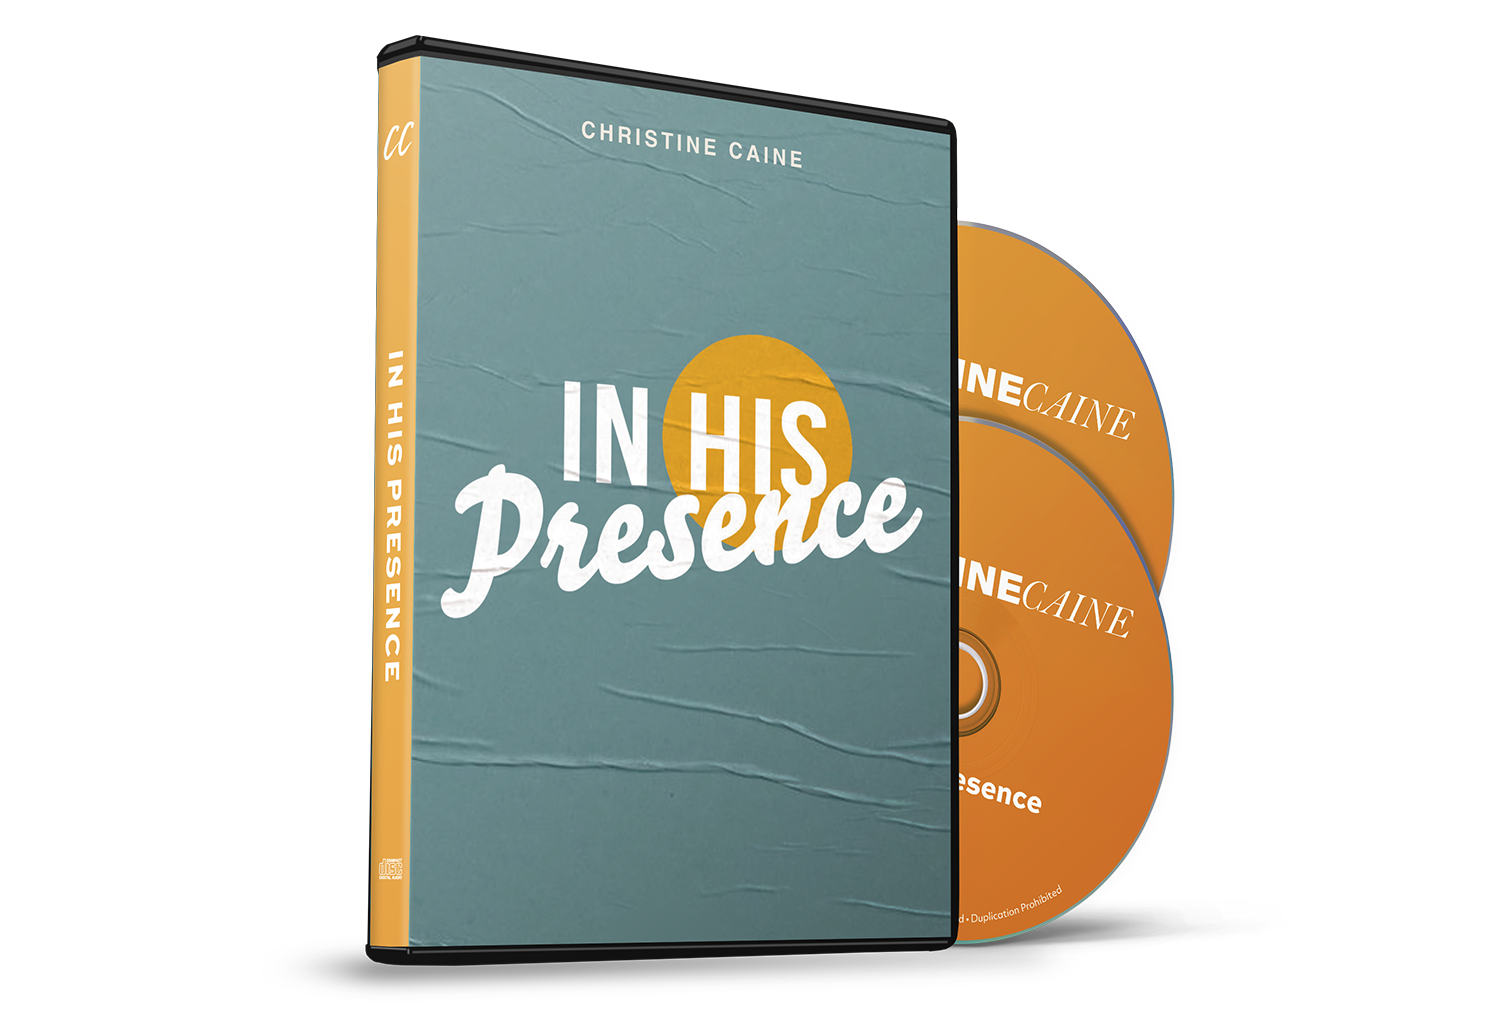 Receive In His Presence by Christine Caine from TBN